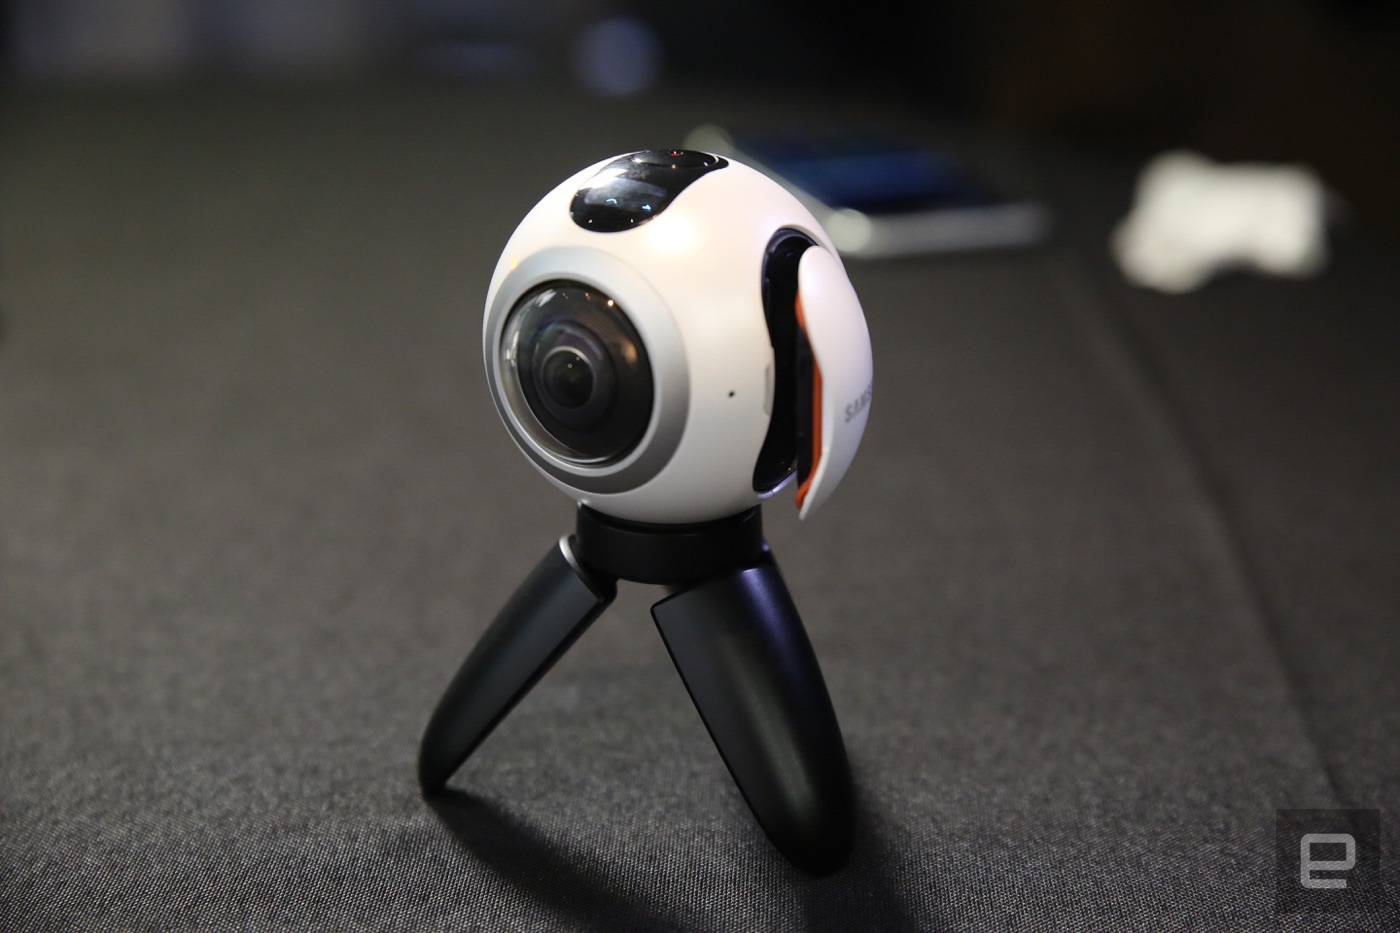 Samsung has a 360-degree camera for Gear VR video